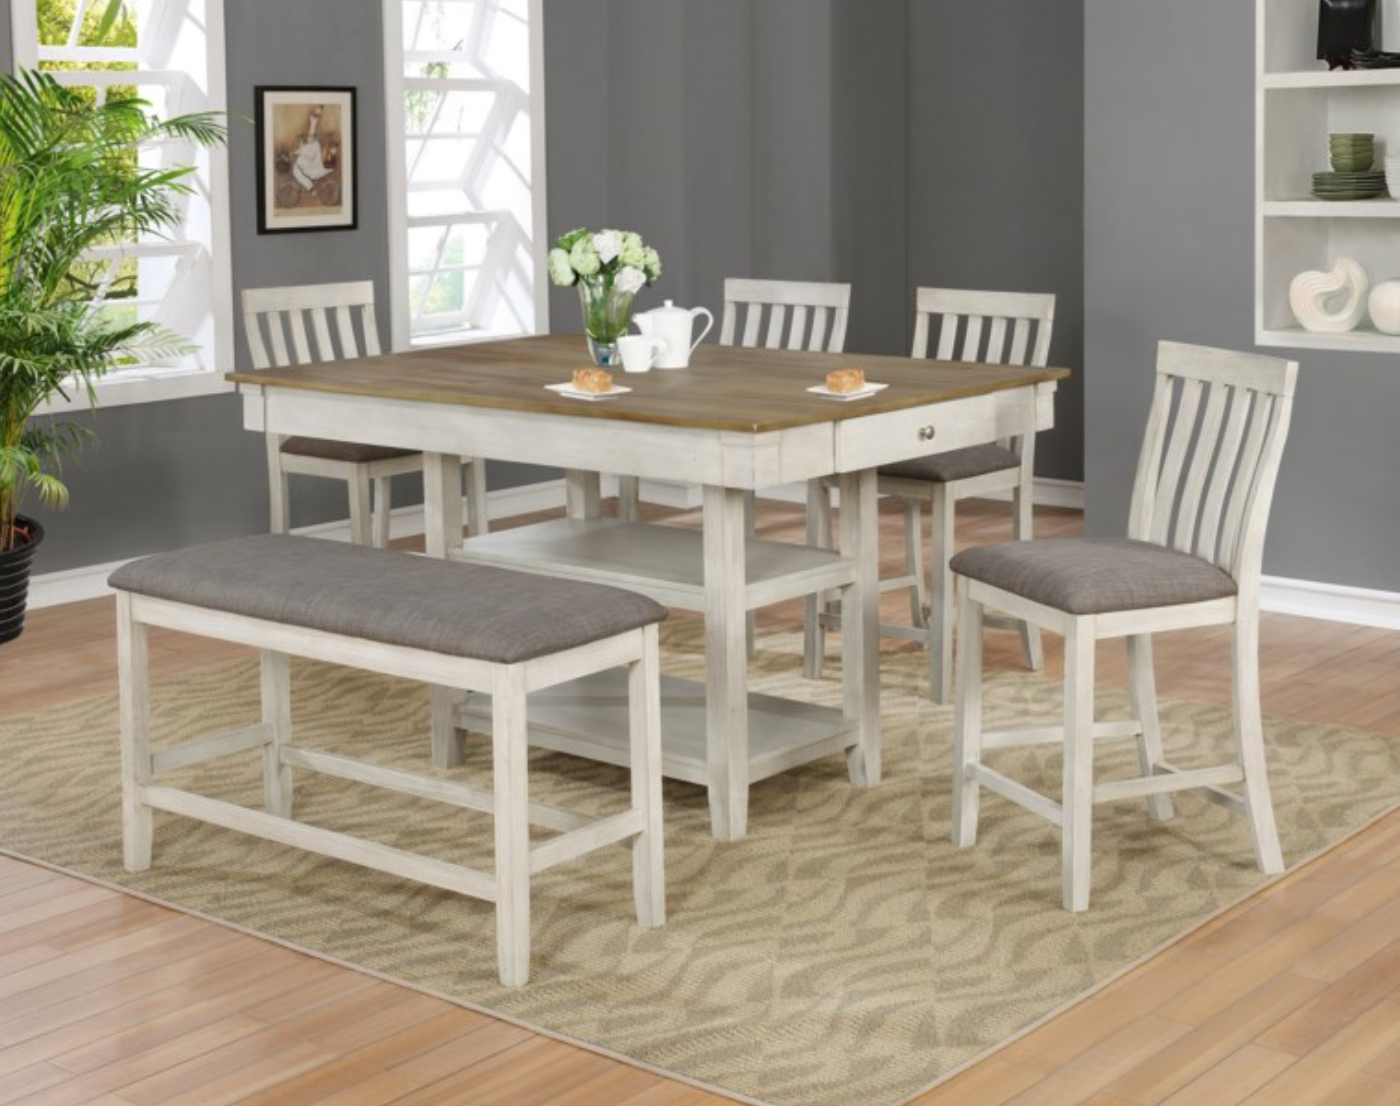 6 pcs dining table bench included 2715 Crown $1,310 Box of chairs (2) $272 Bench $178,Instore